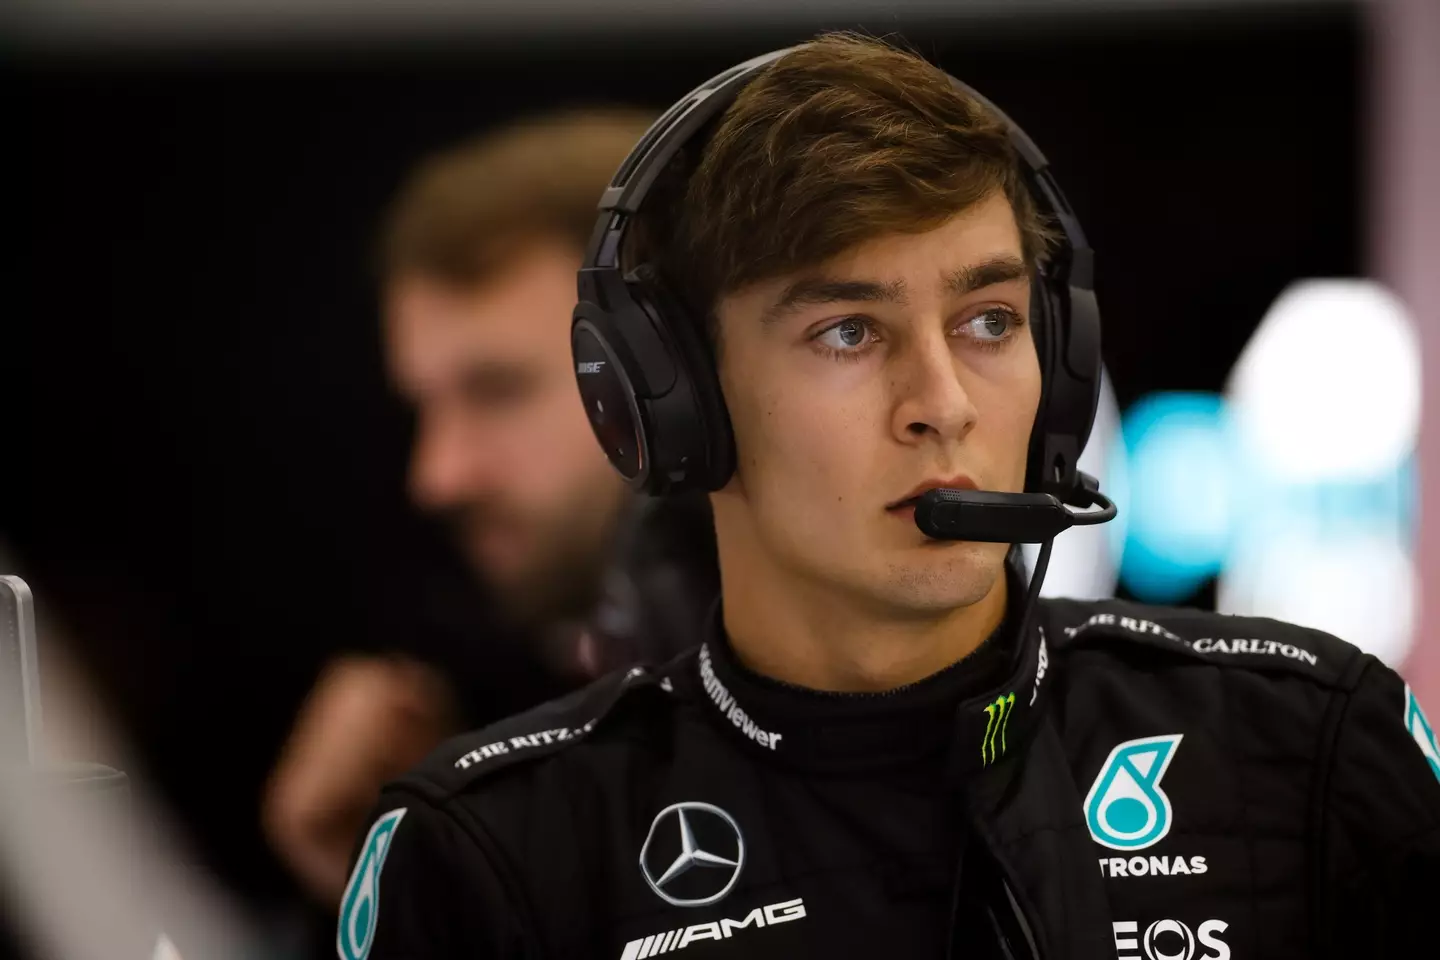 George Russell managed to secure sixth place on the starting grid at the Belgian grand prix following Friday's qualifying.